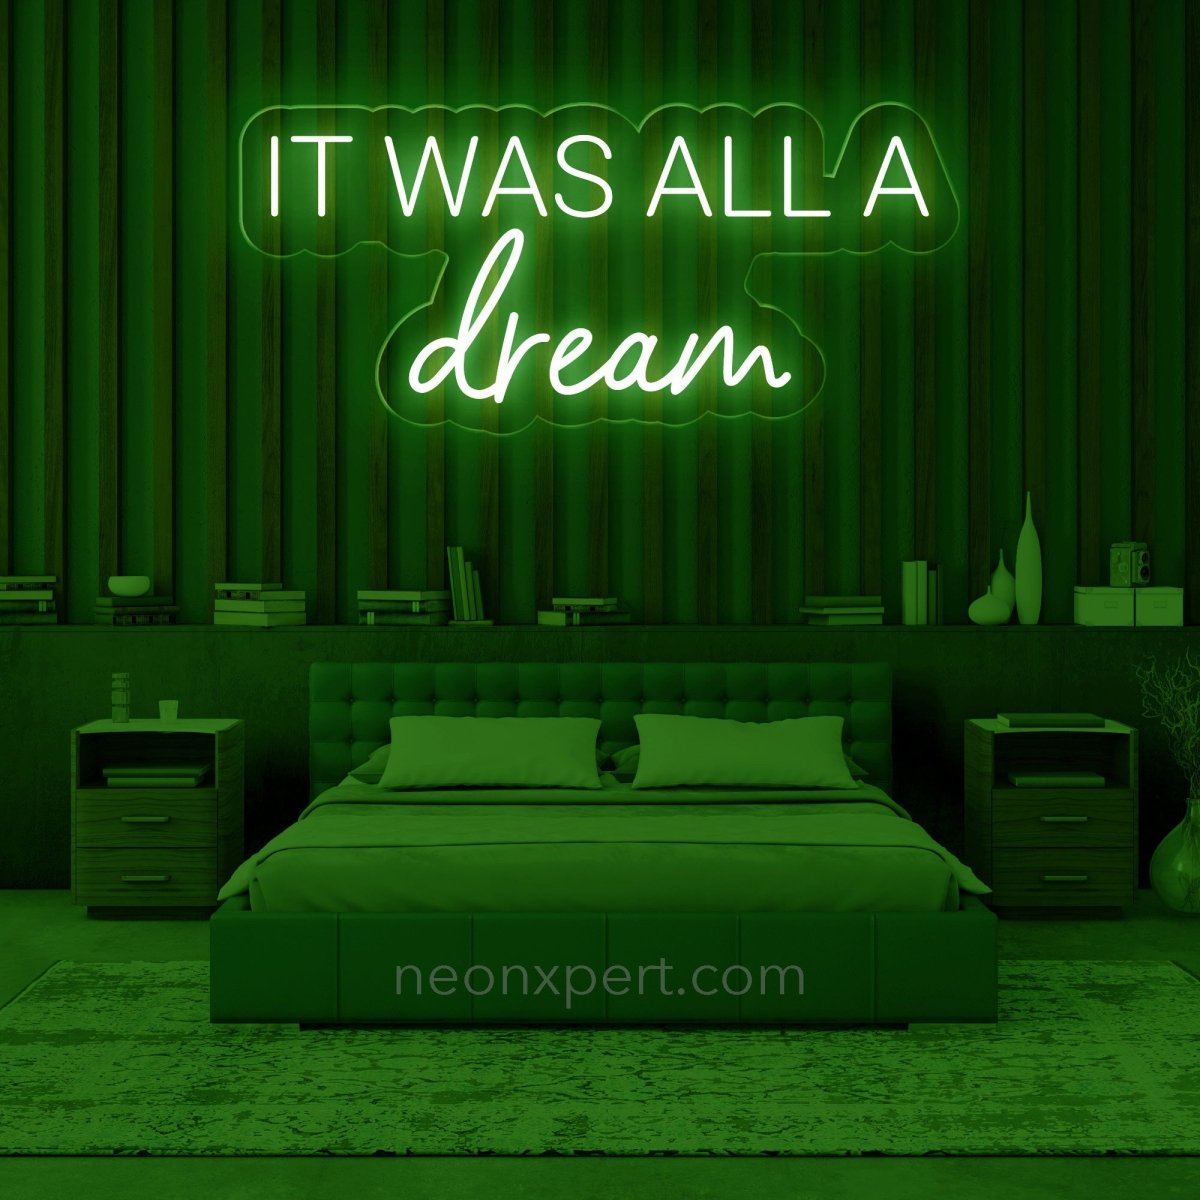 It was all a dream neon sign - NeonXpert